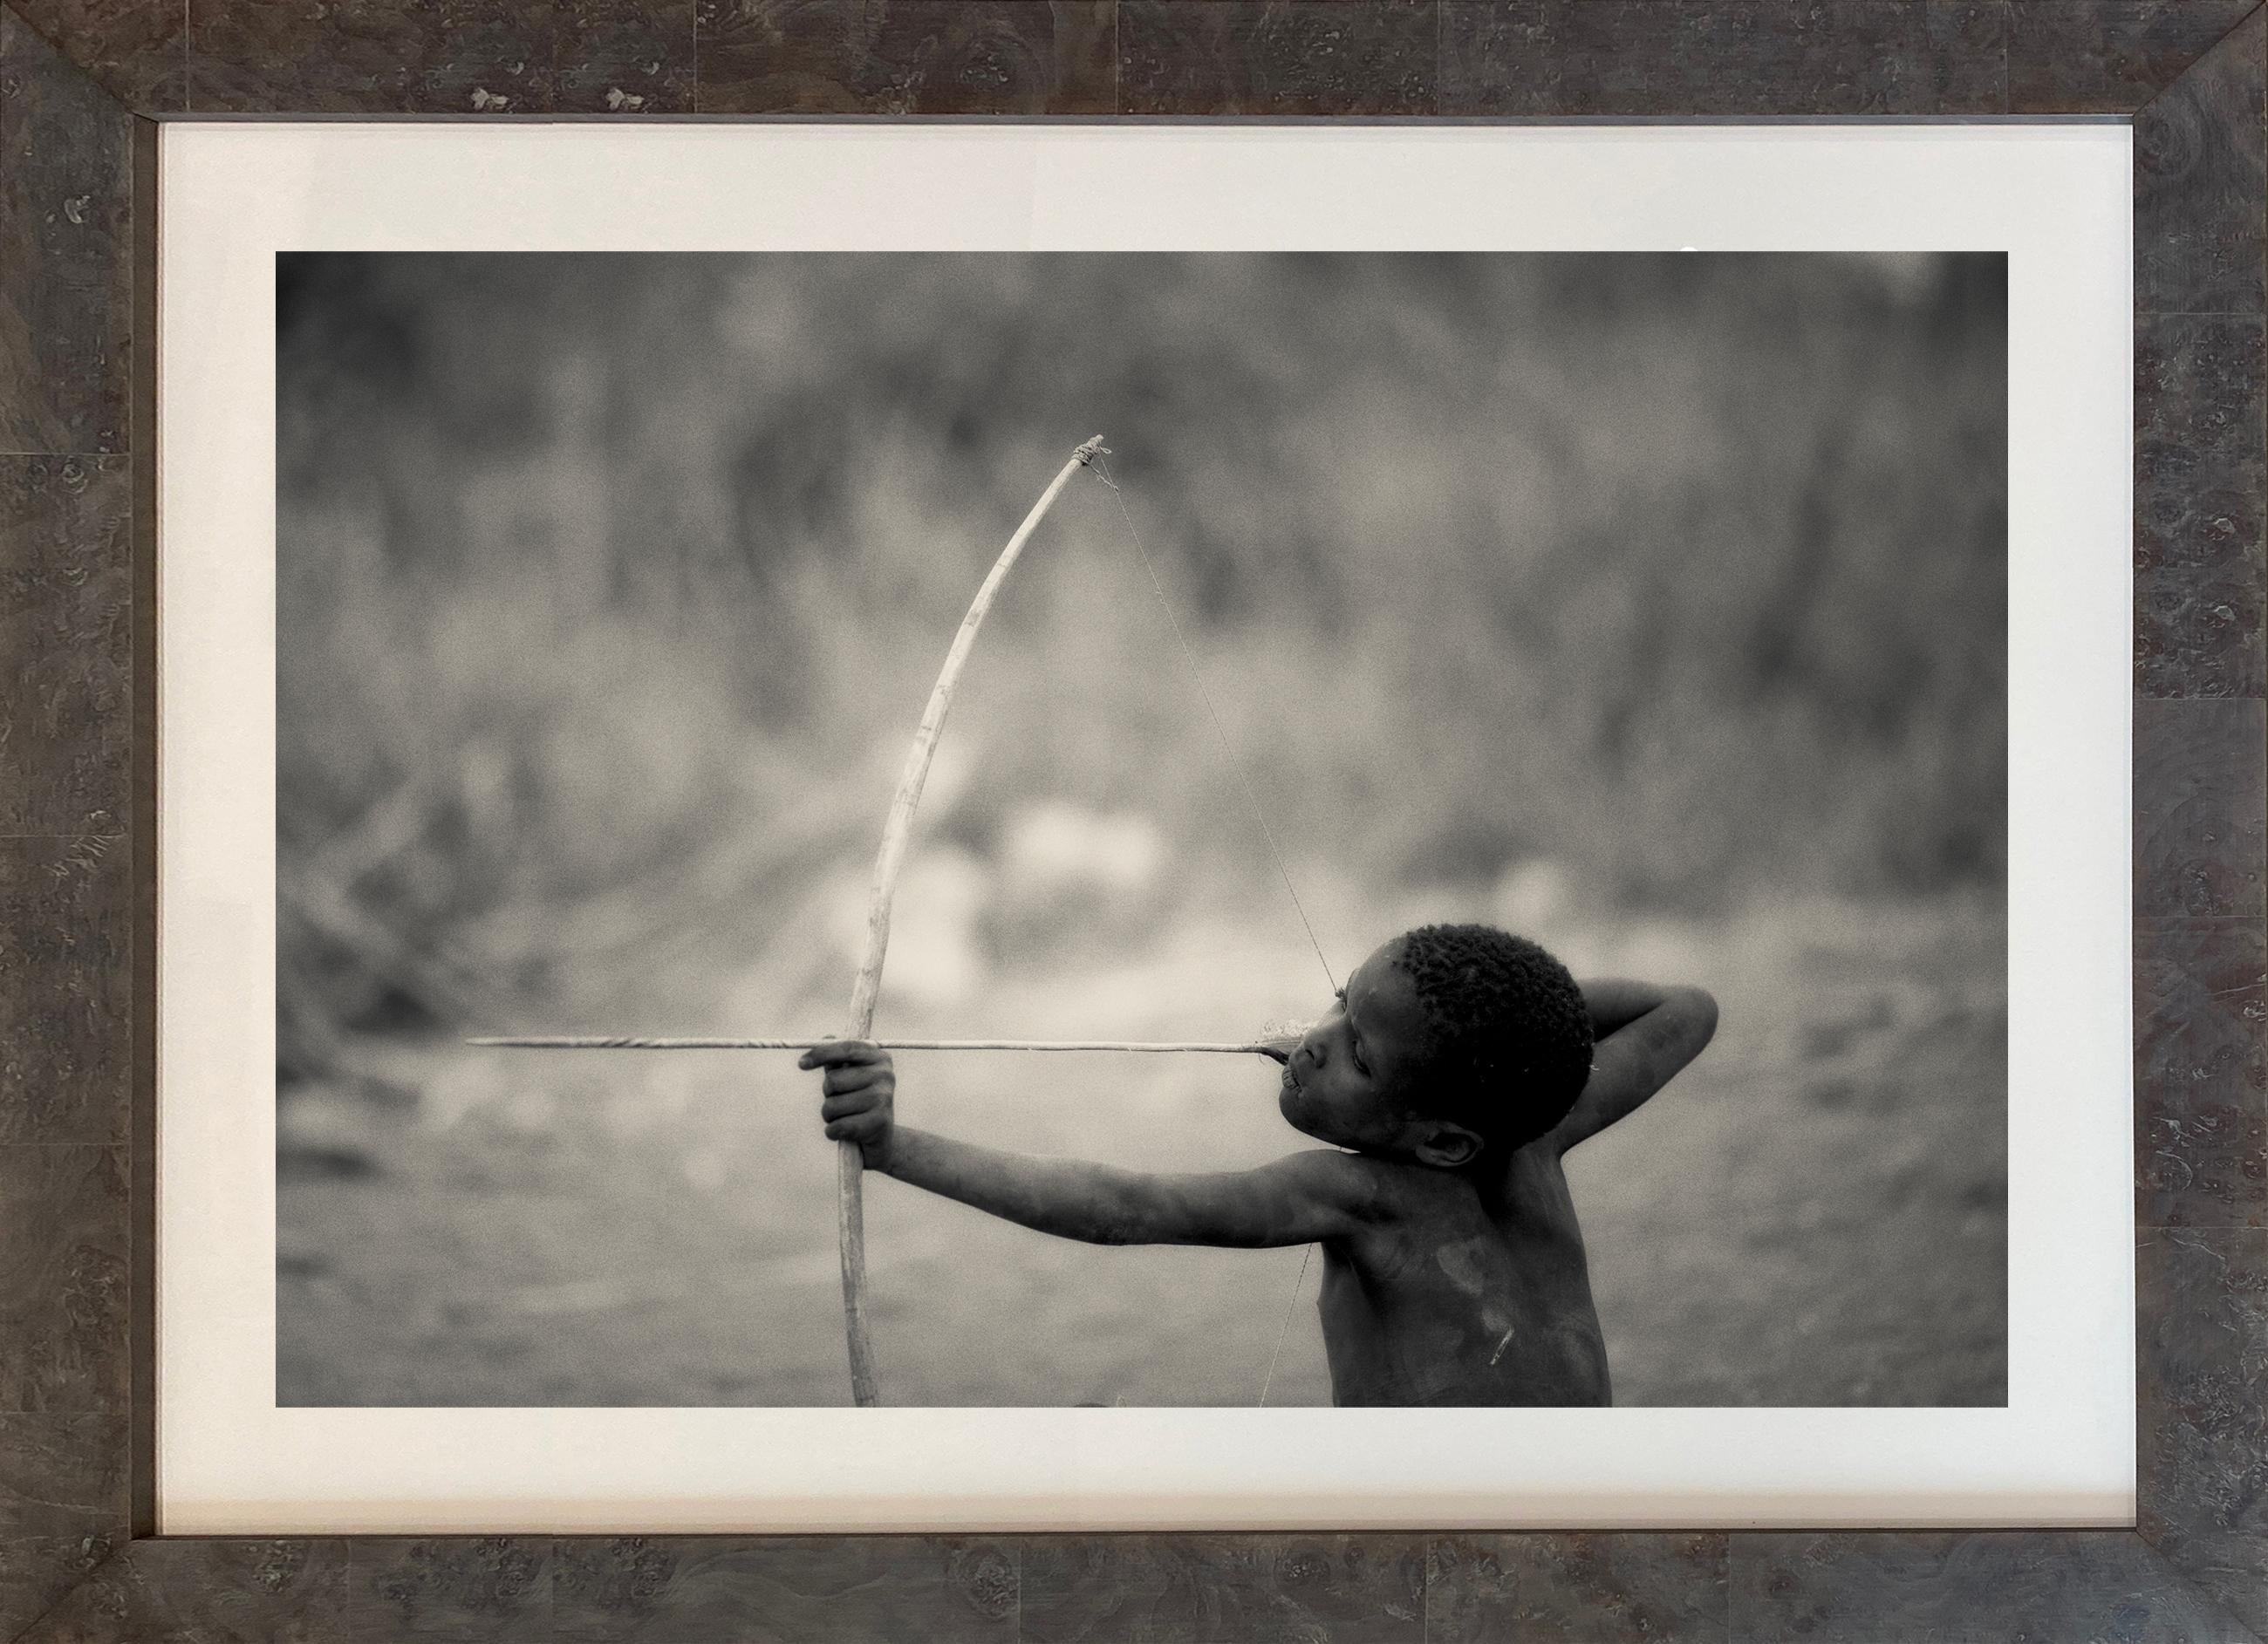 'HADZABE,' Tanzanian Child with Bow, Black and White Photograph by Nicol Ragland